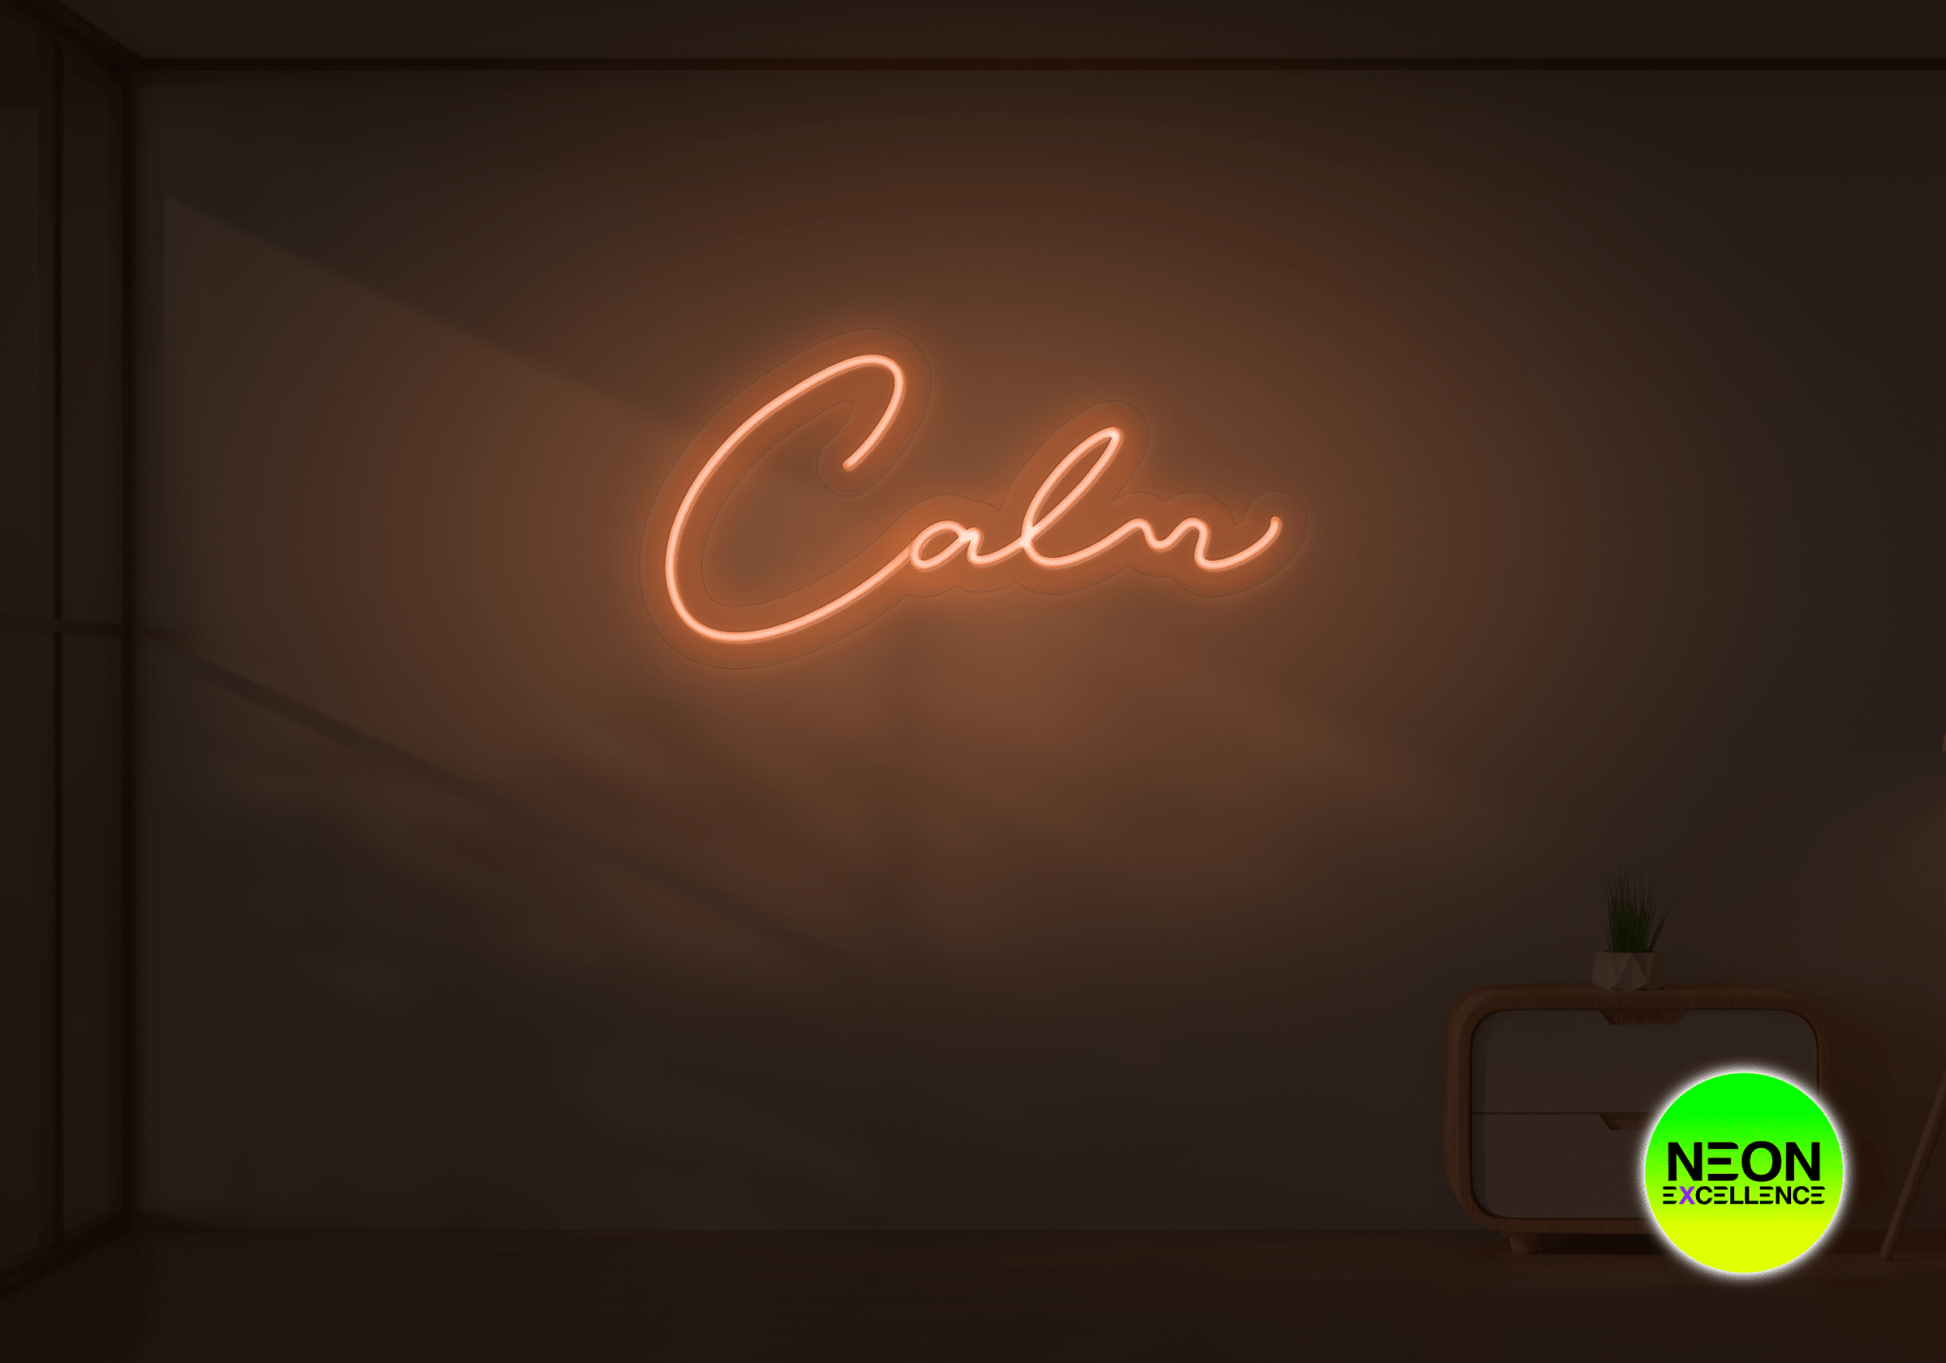 Calm LED Neon Sign - Neon Excellence